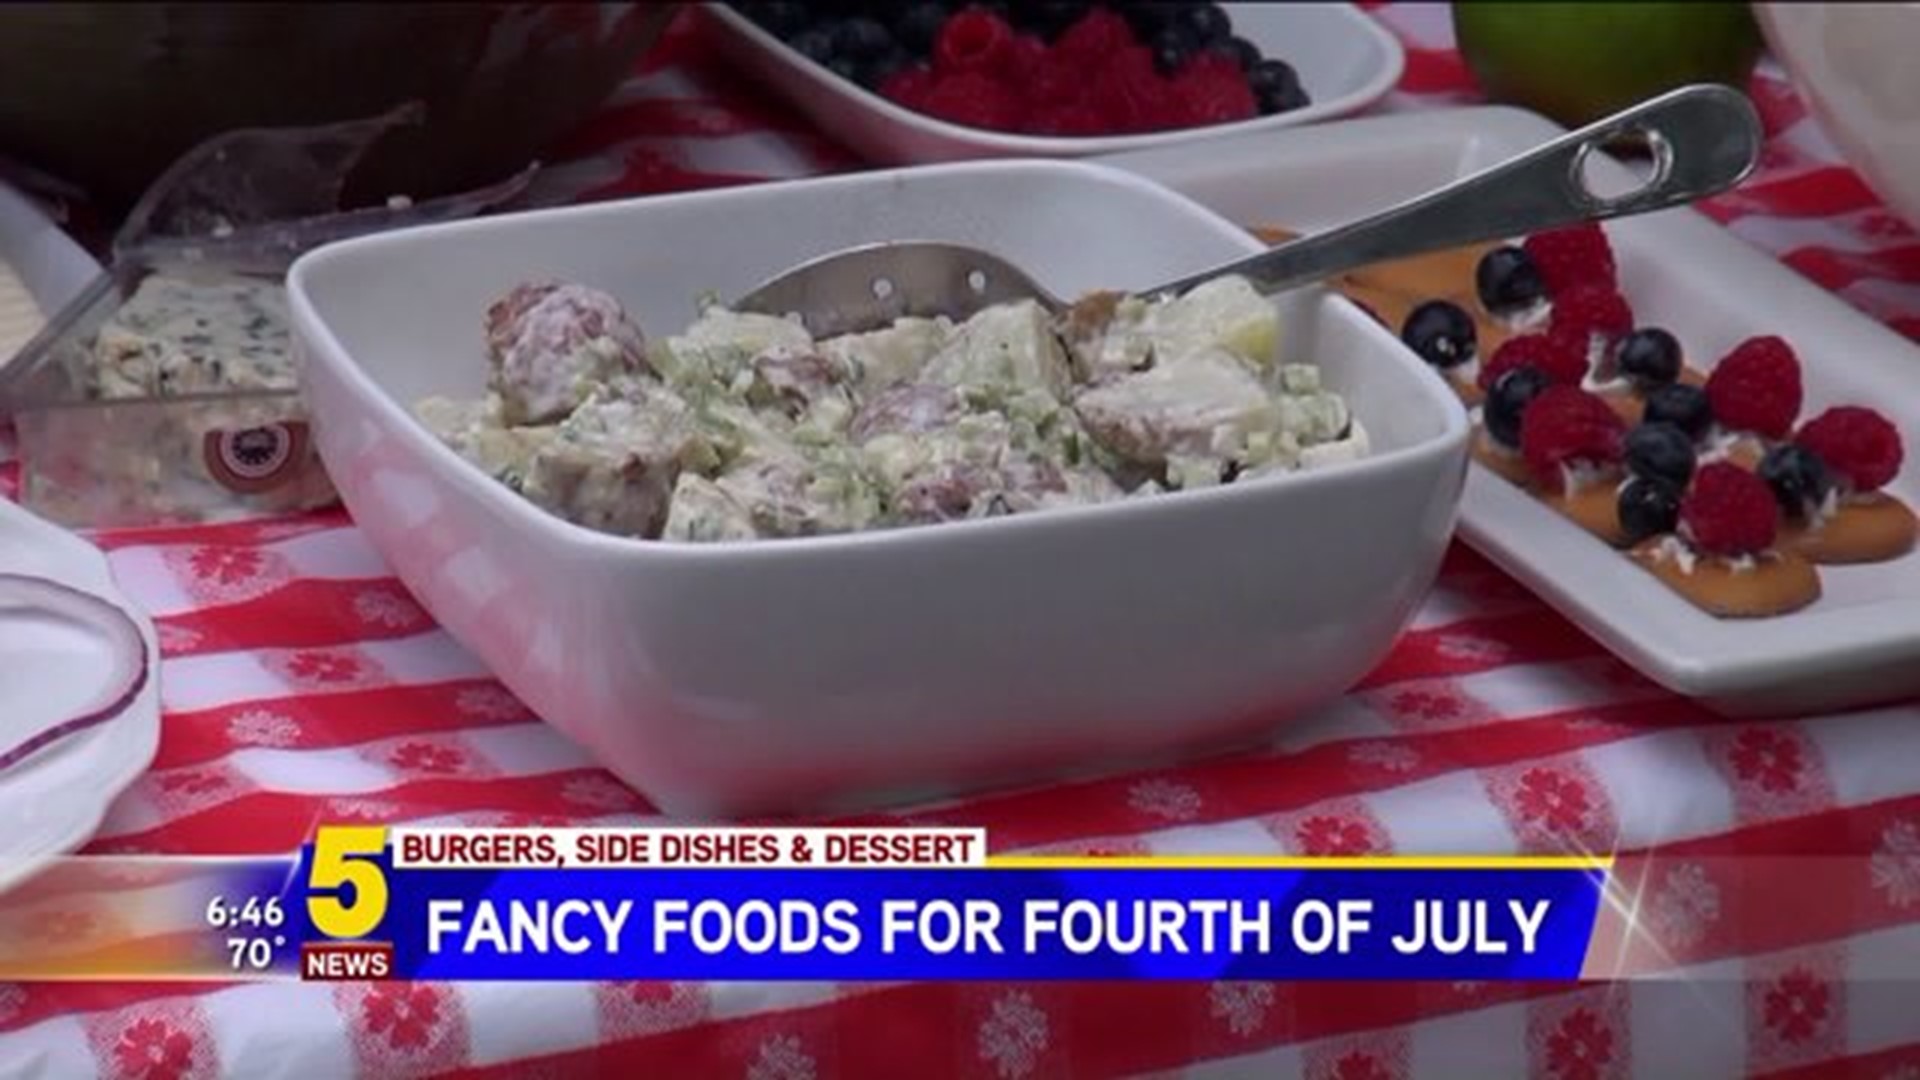 Fancy Food for Fourth of July - Part Two